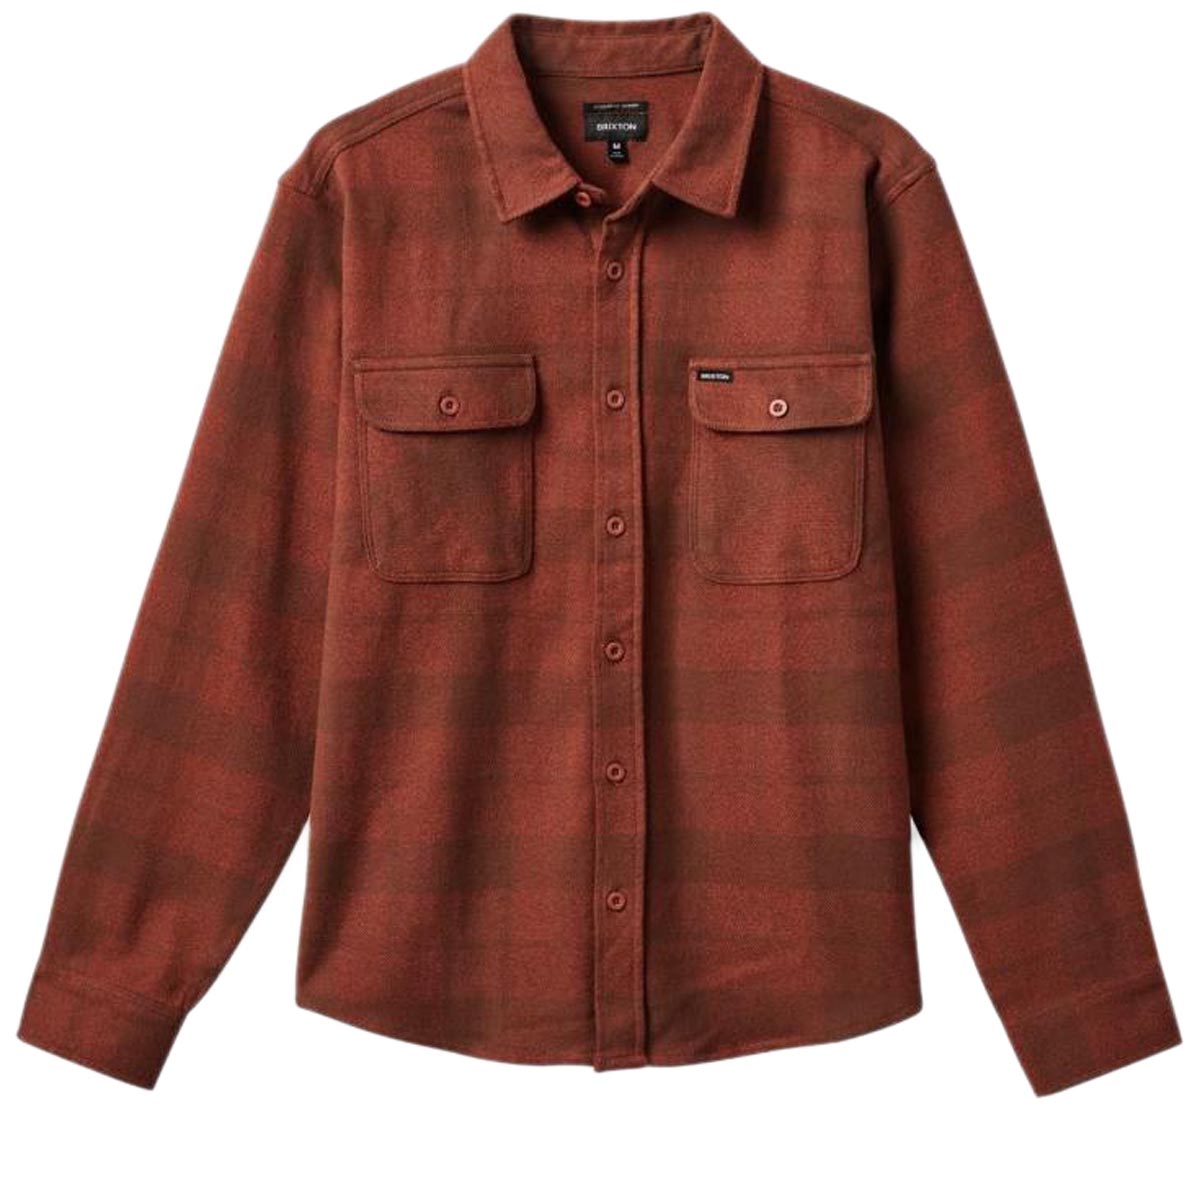 Brixton Bowery Stretch Water Resistant Flannel Shirt - Sepia/Terracotta image 3